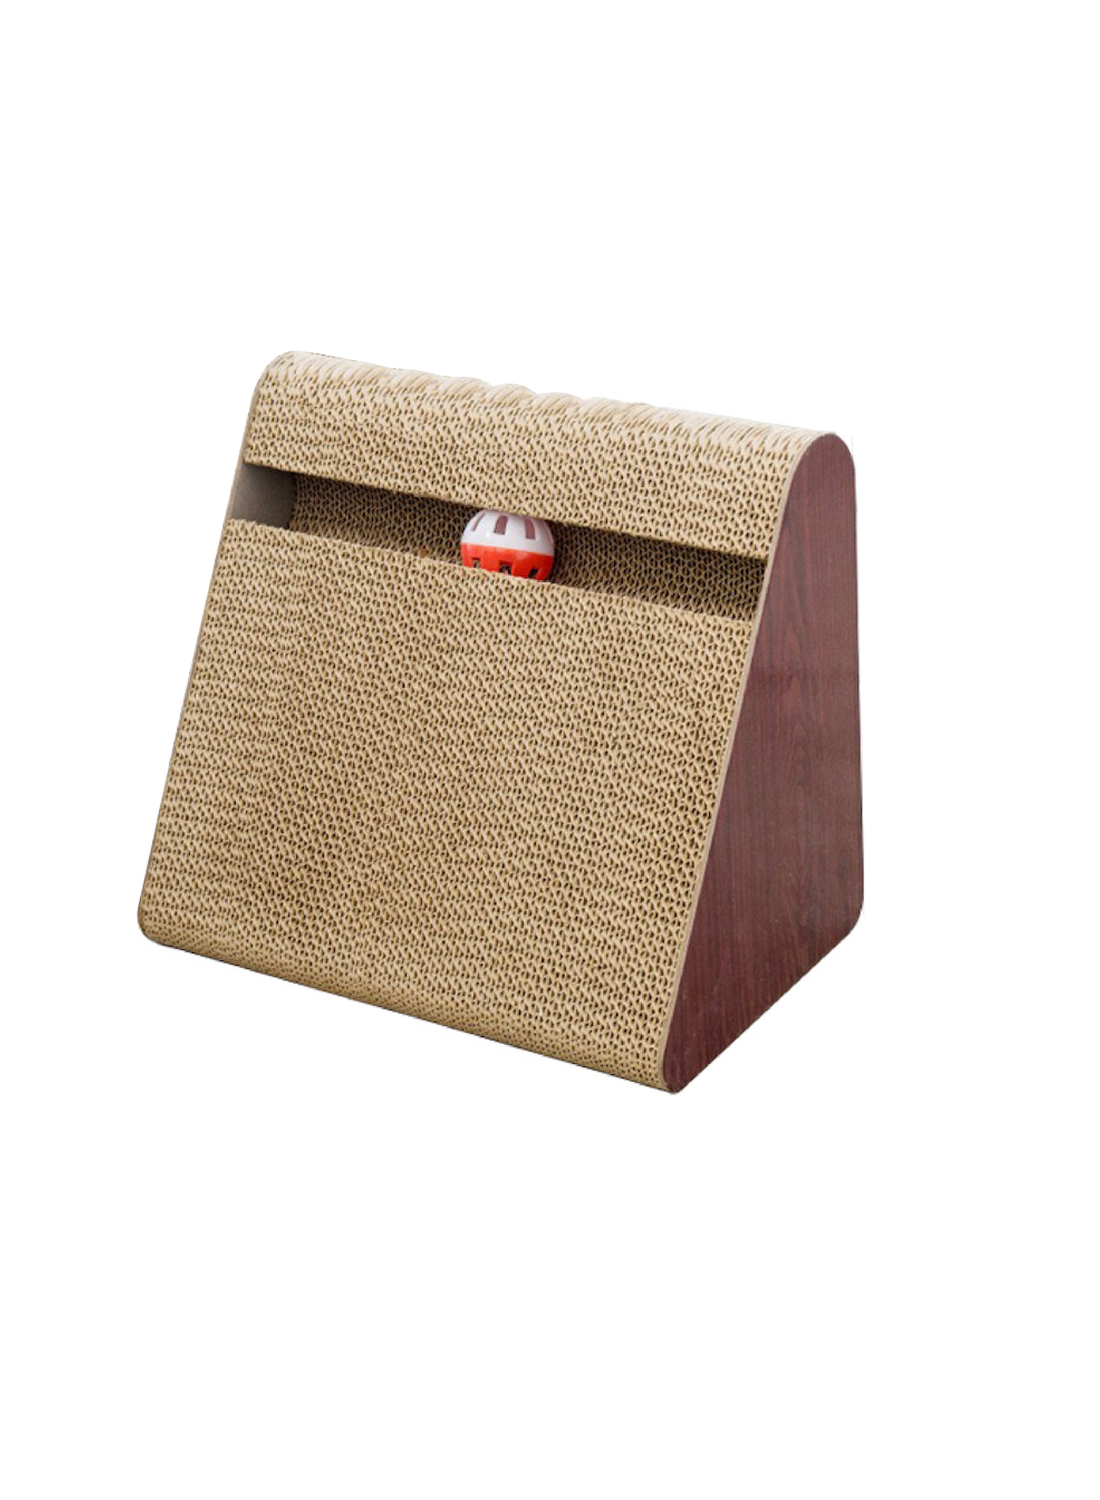 Triangle Cat Scratching Board Nest Sturdy High Density Corrugated Cardboard Claw Sharpener Wear-resistant Standing Wall Scratching Post (Small 27*22*16cm)